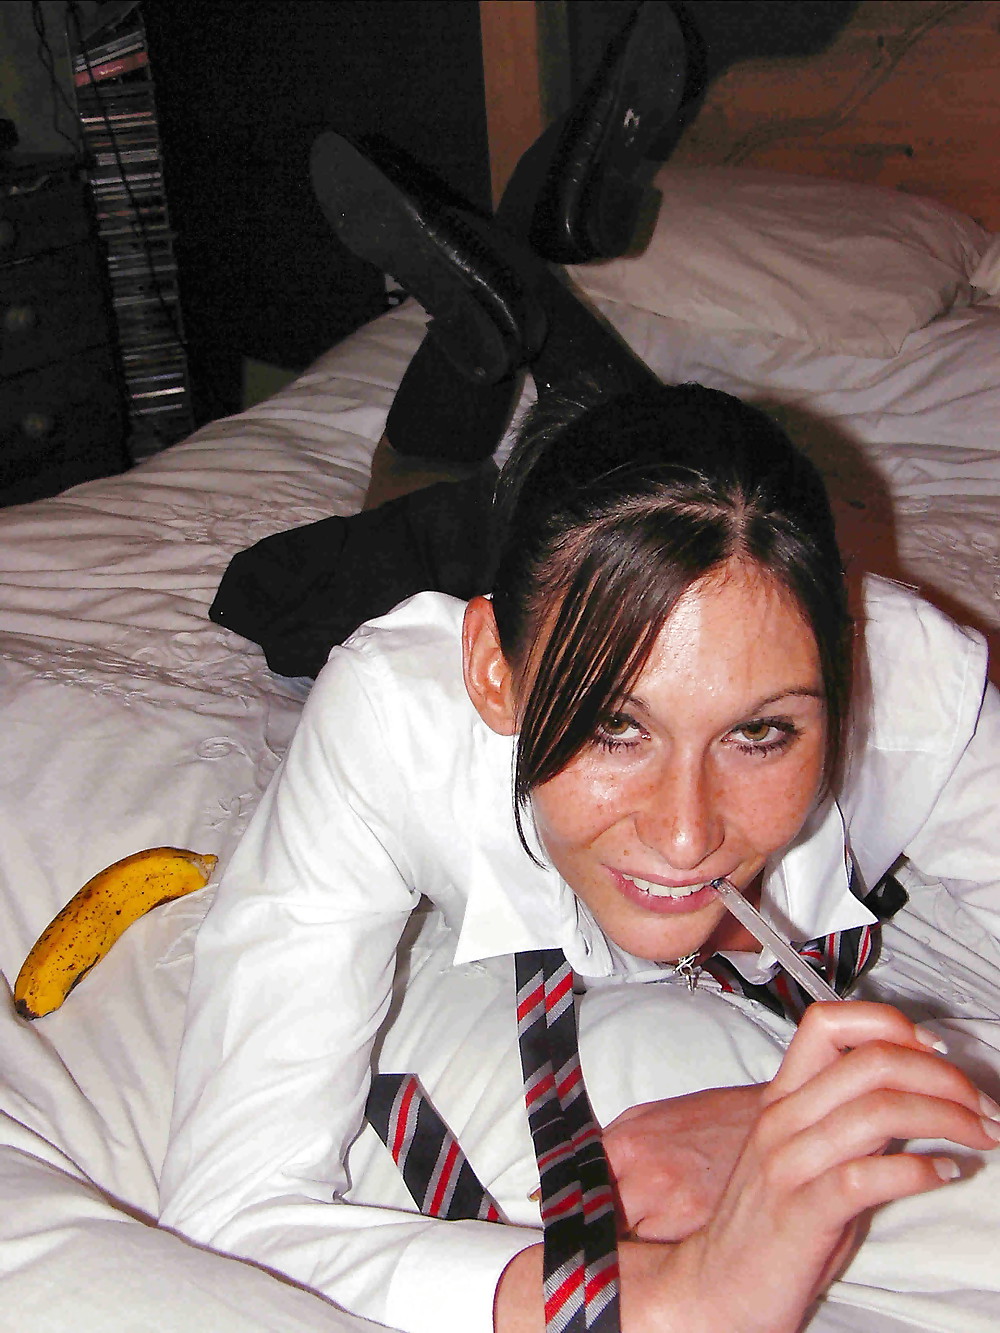 Porn Pics Hot teen with a tie